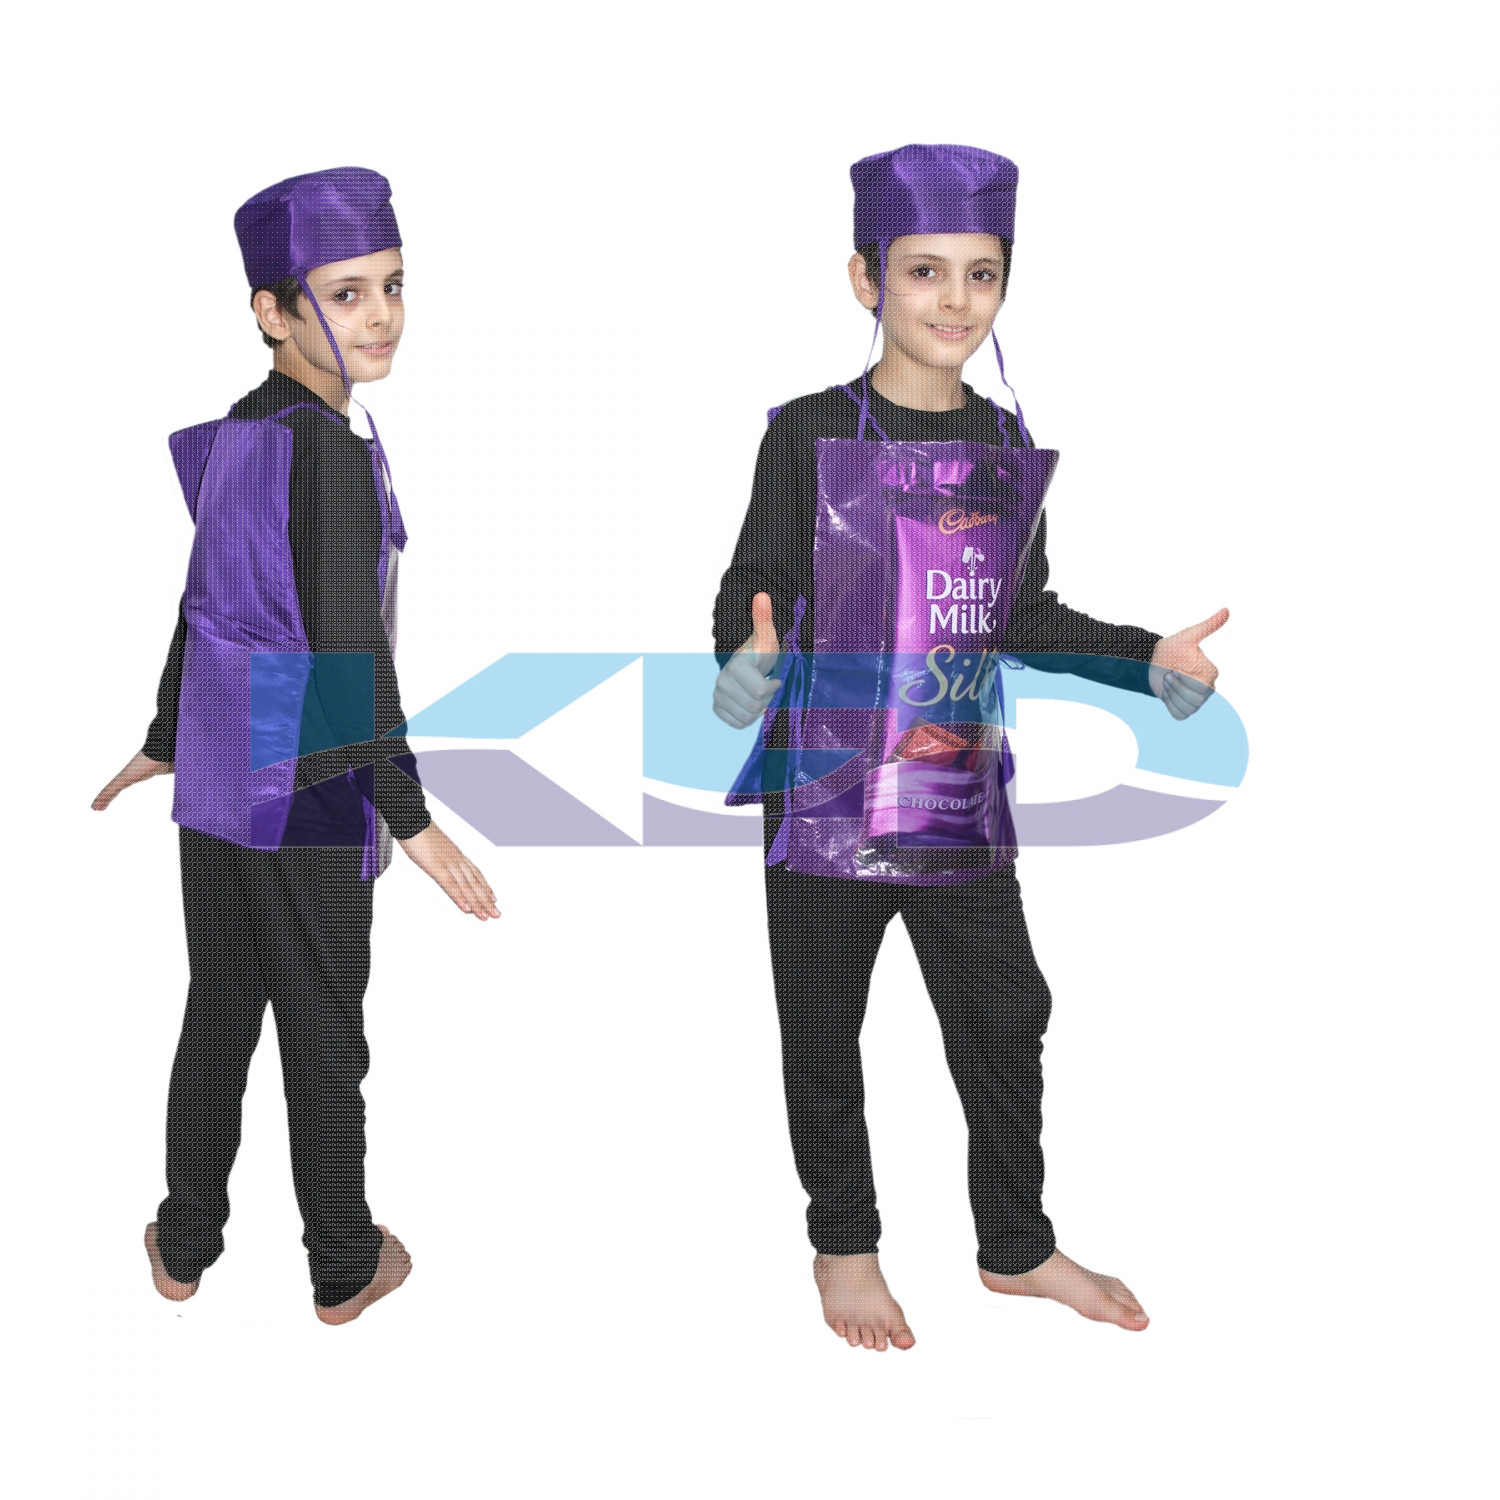 Dairy Milk fancy dress for kids,Object Costume for School Annual function/Theme Party/Competition/Stage Shows Dress